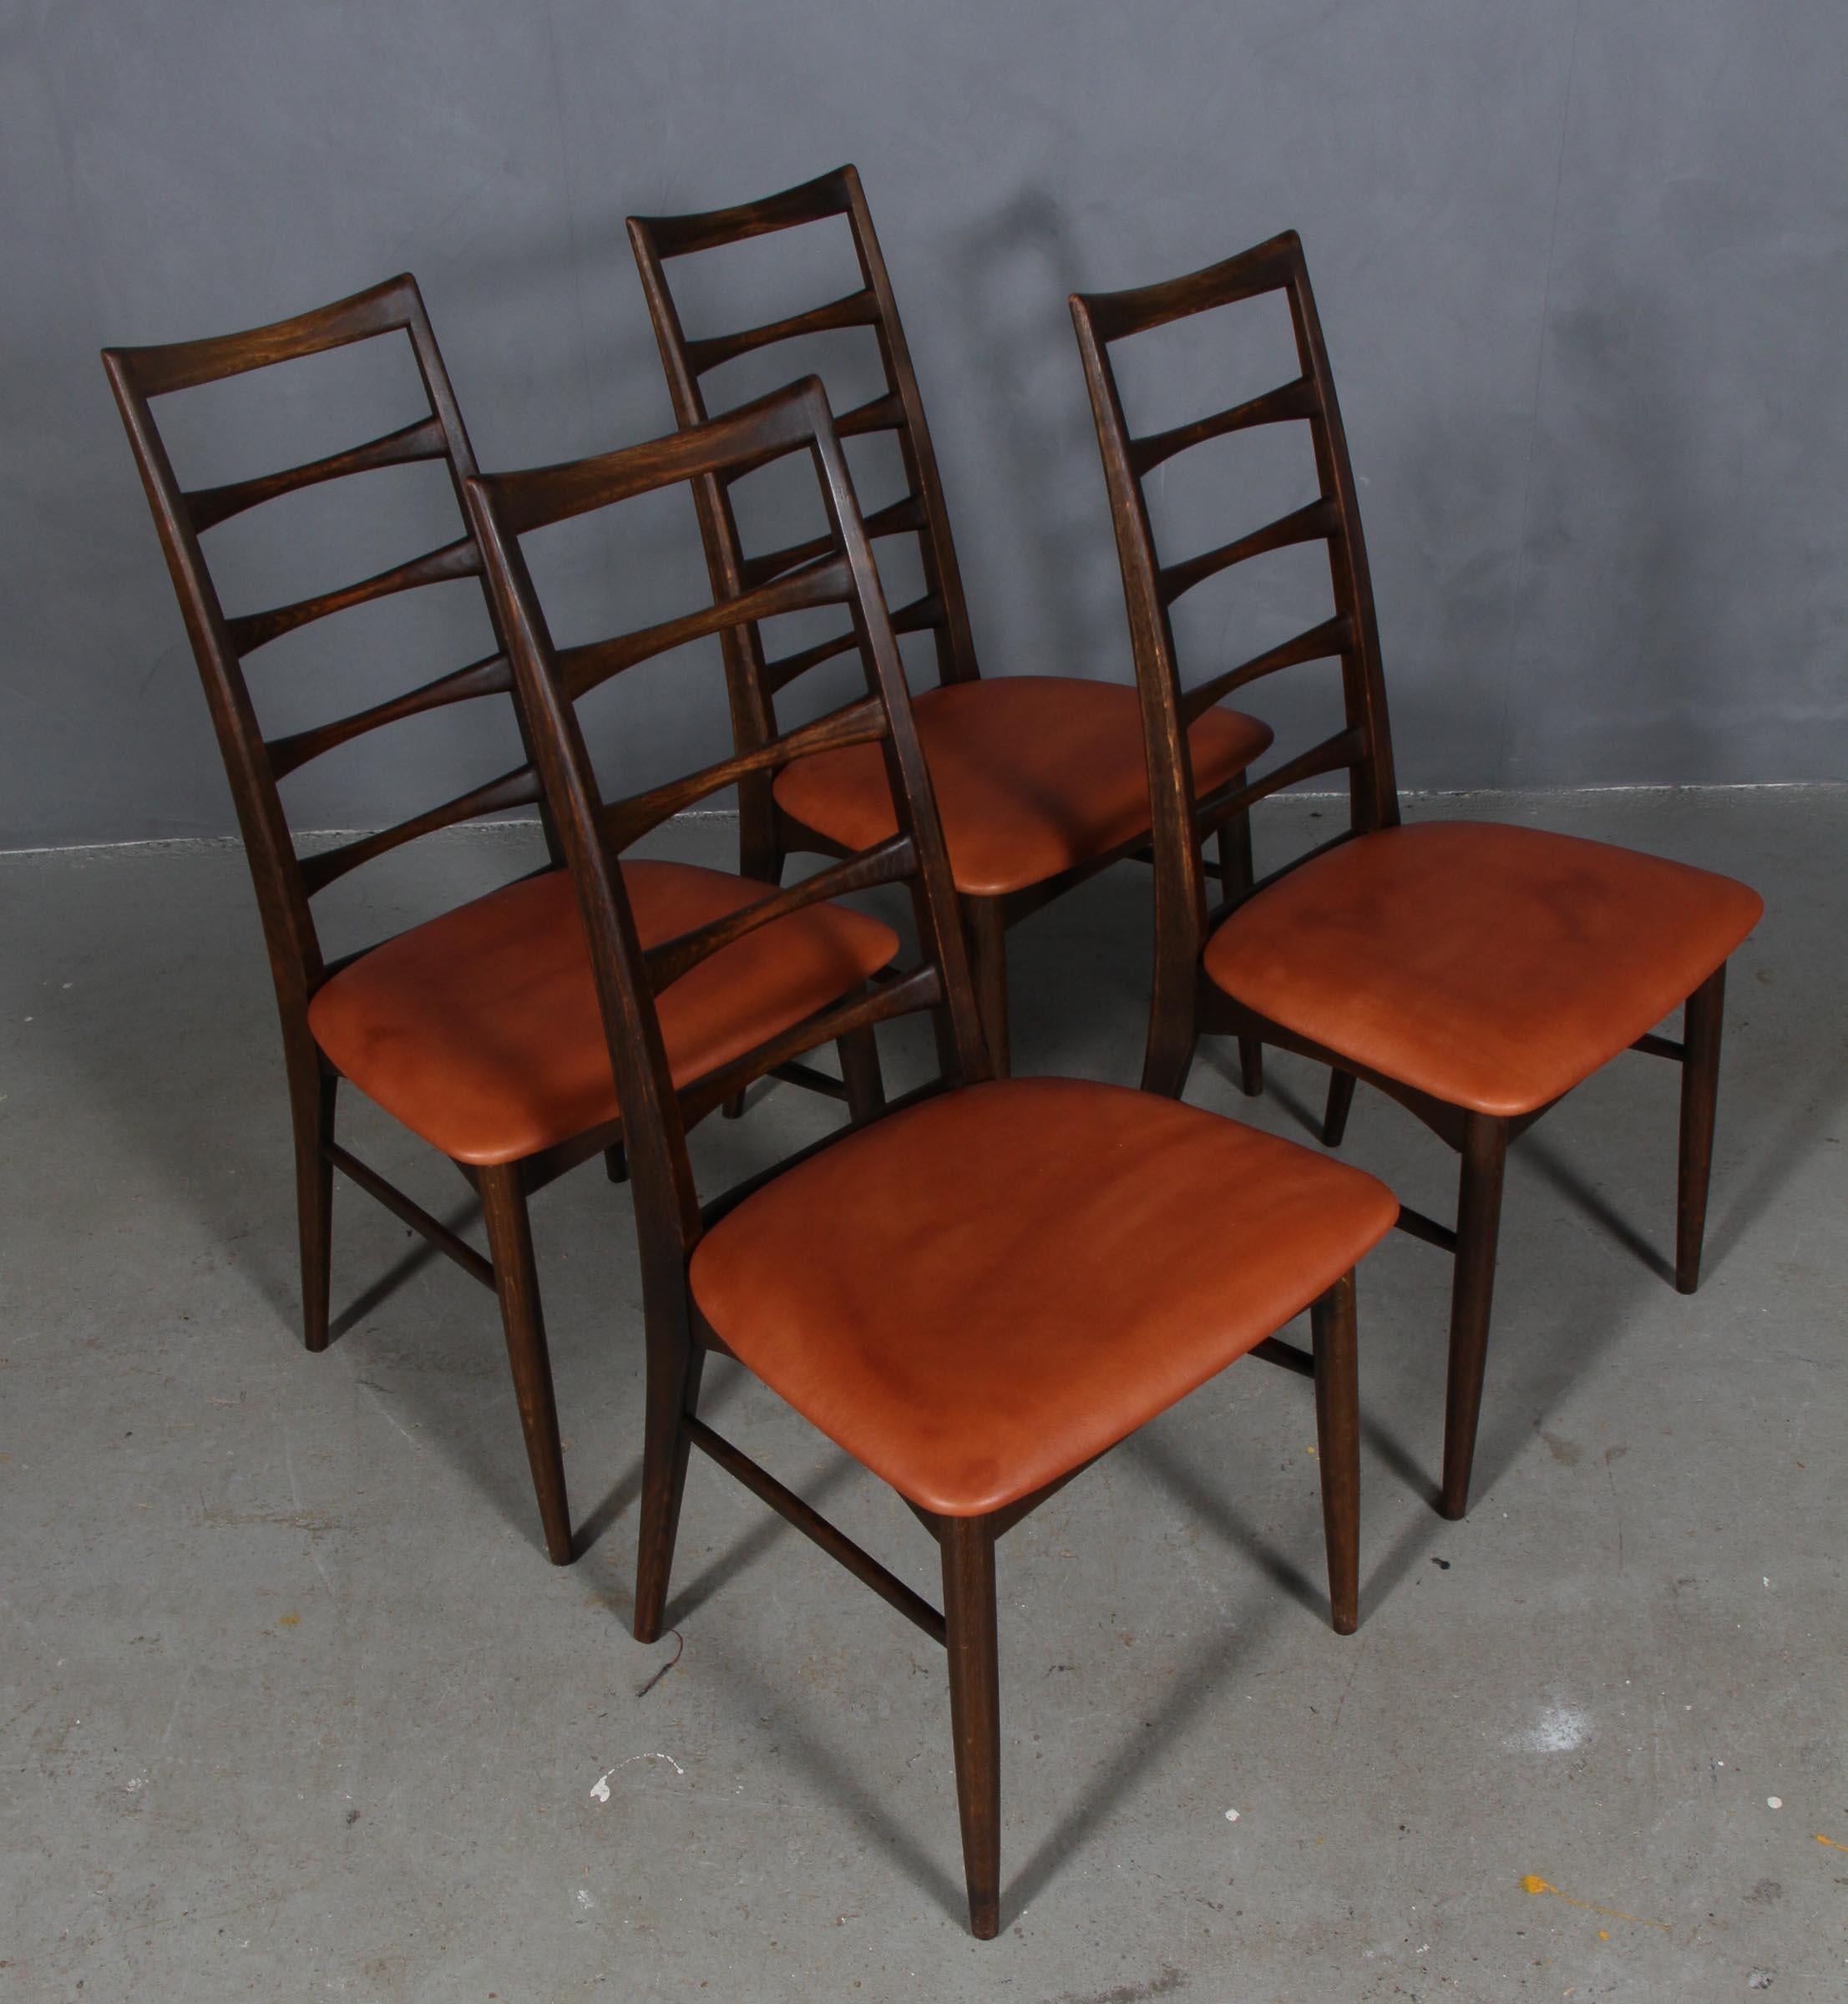 Set of Niels Koefoed dining chairs made in solid smoked oak.

New upholstered in tan aniline leather.

Model Lis, made by Niels Koefoeds Møbelfabrik Hornslet, 1960s.

